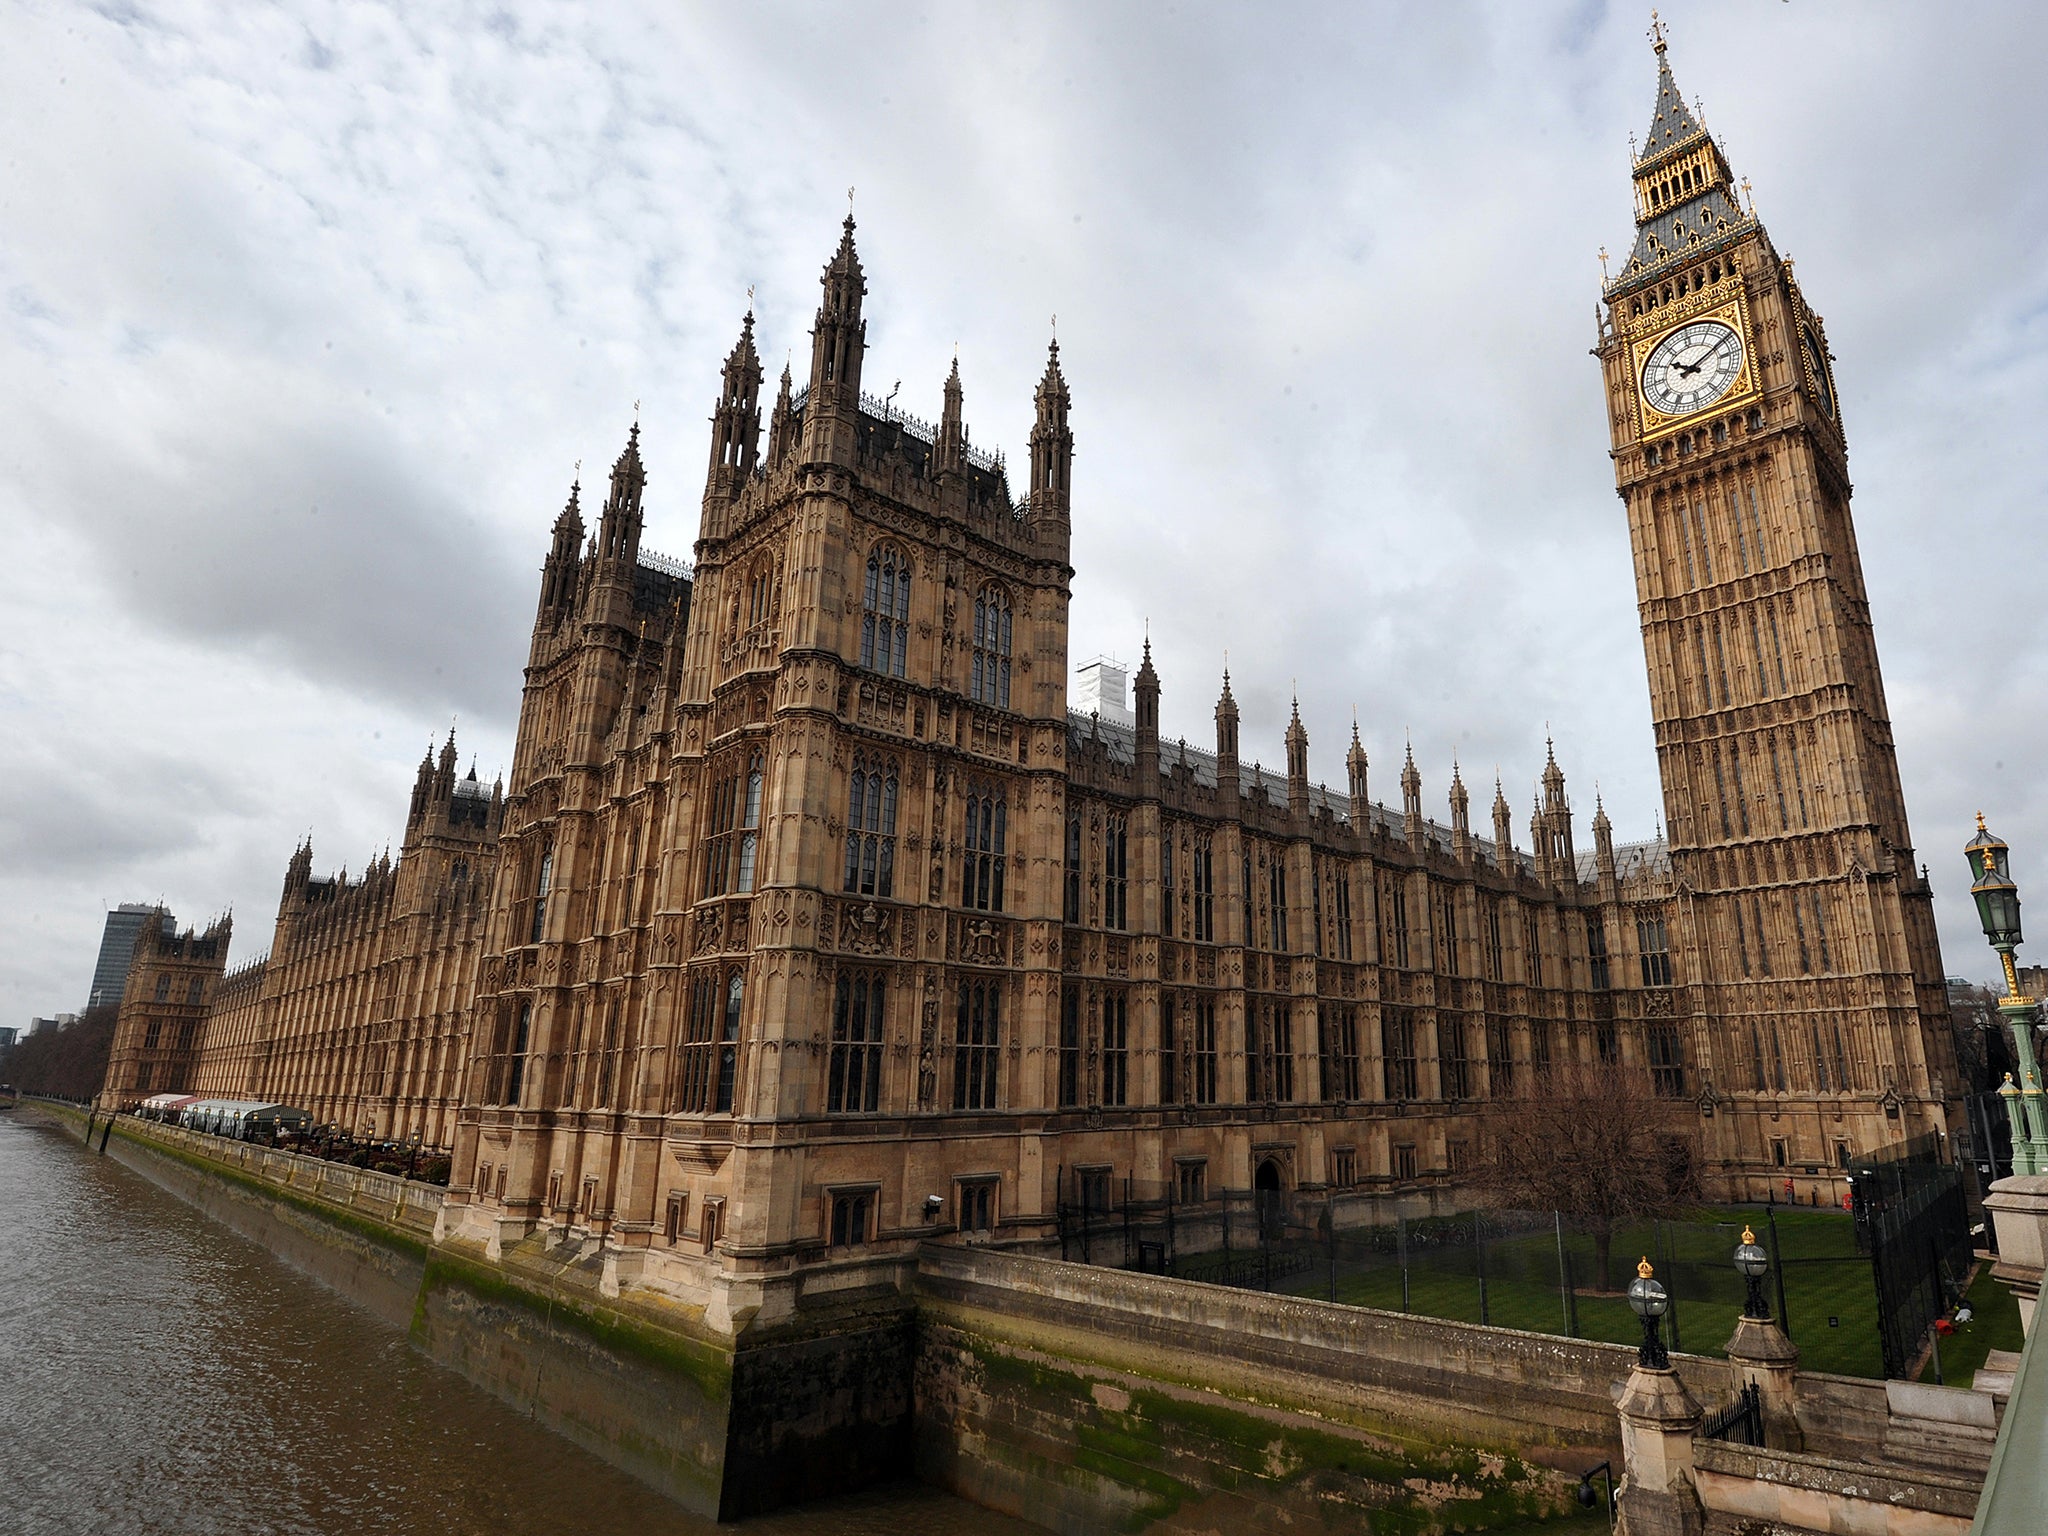 The cost of restoring the Palace of Westminster has been estimated at more than £3bn